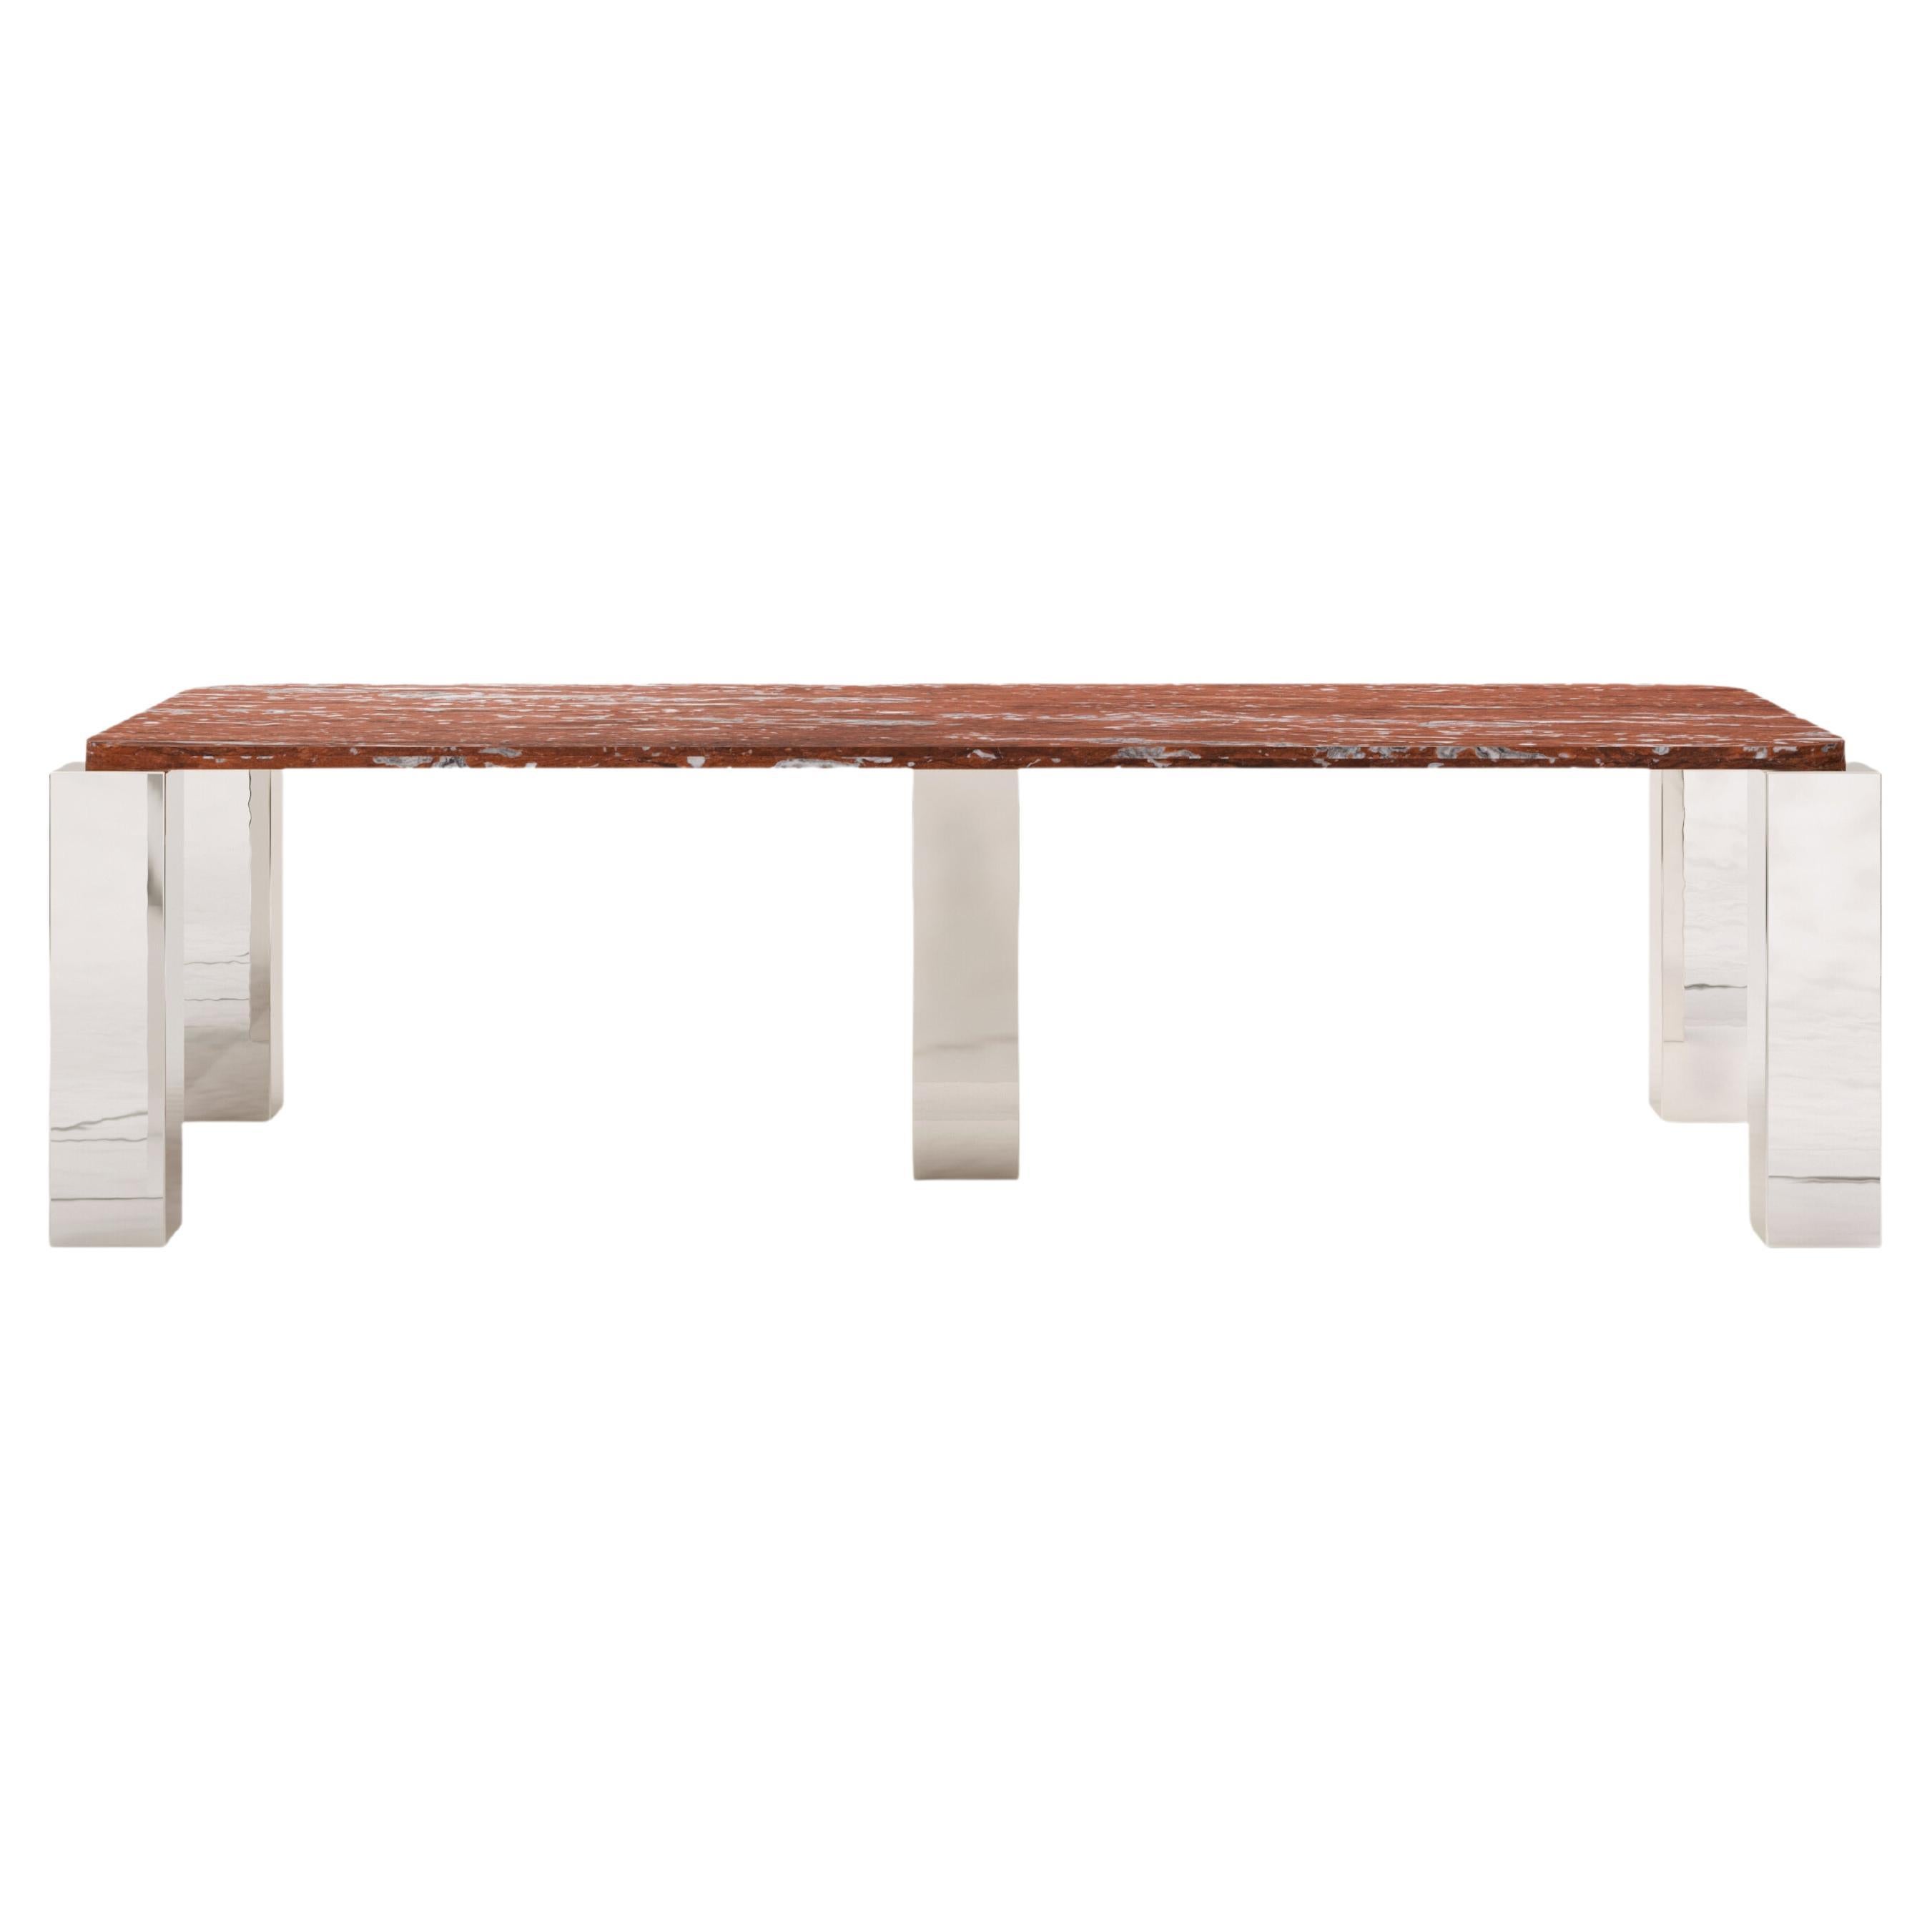 FORM(LA) Cubo Rectangle Dining Table 120”L x 50”W x 30”H Francia Marble & Chrome For Sale